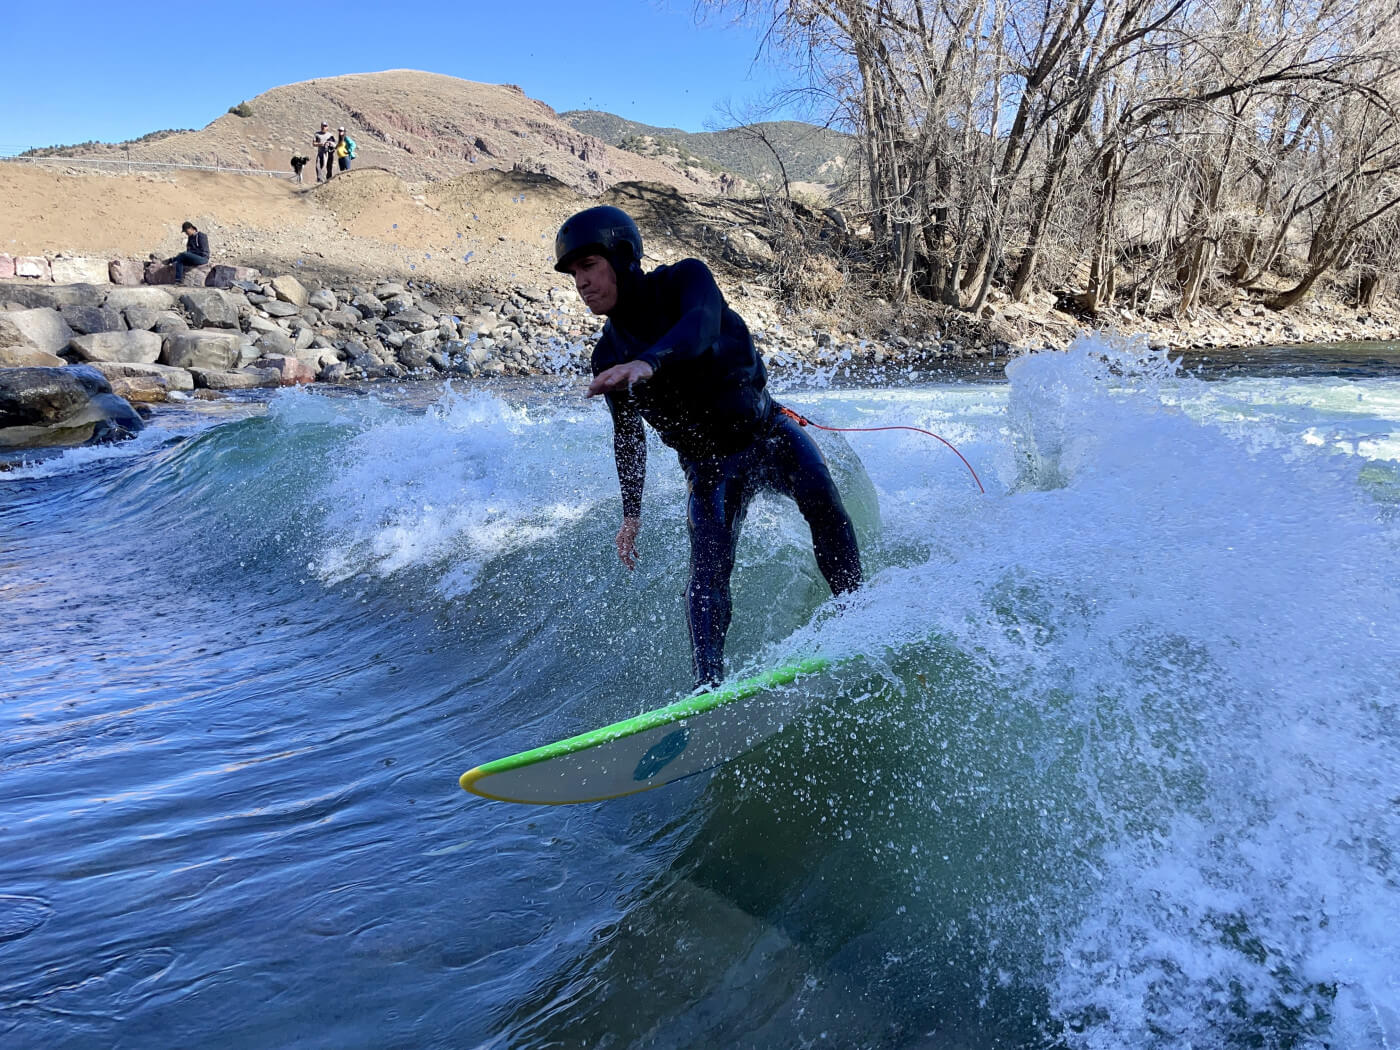 Zack Hughes ripping the new surf wave in Salida, Colorado